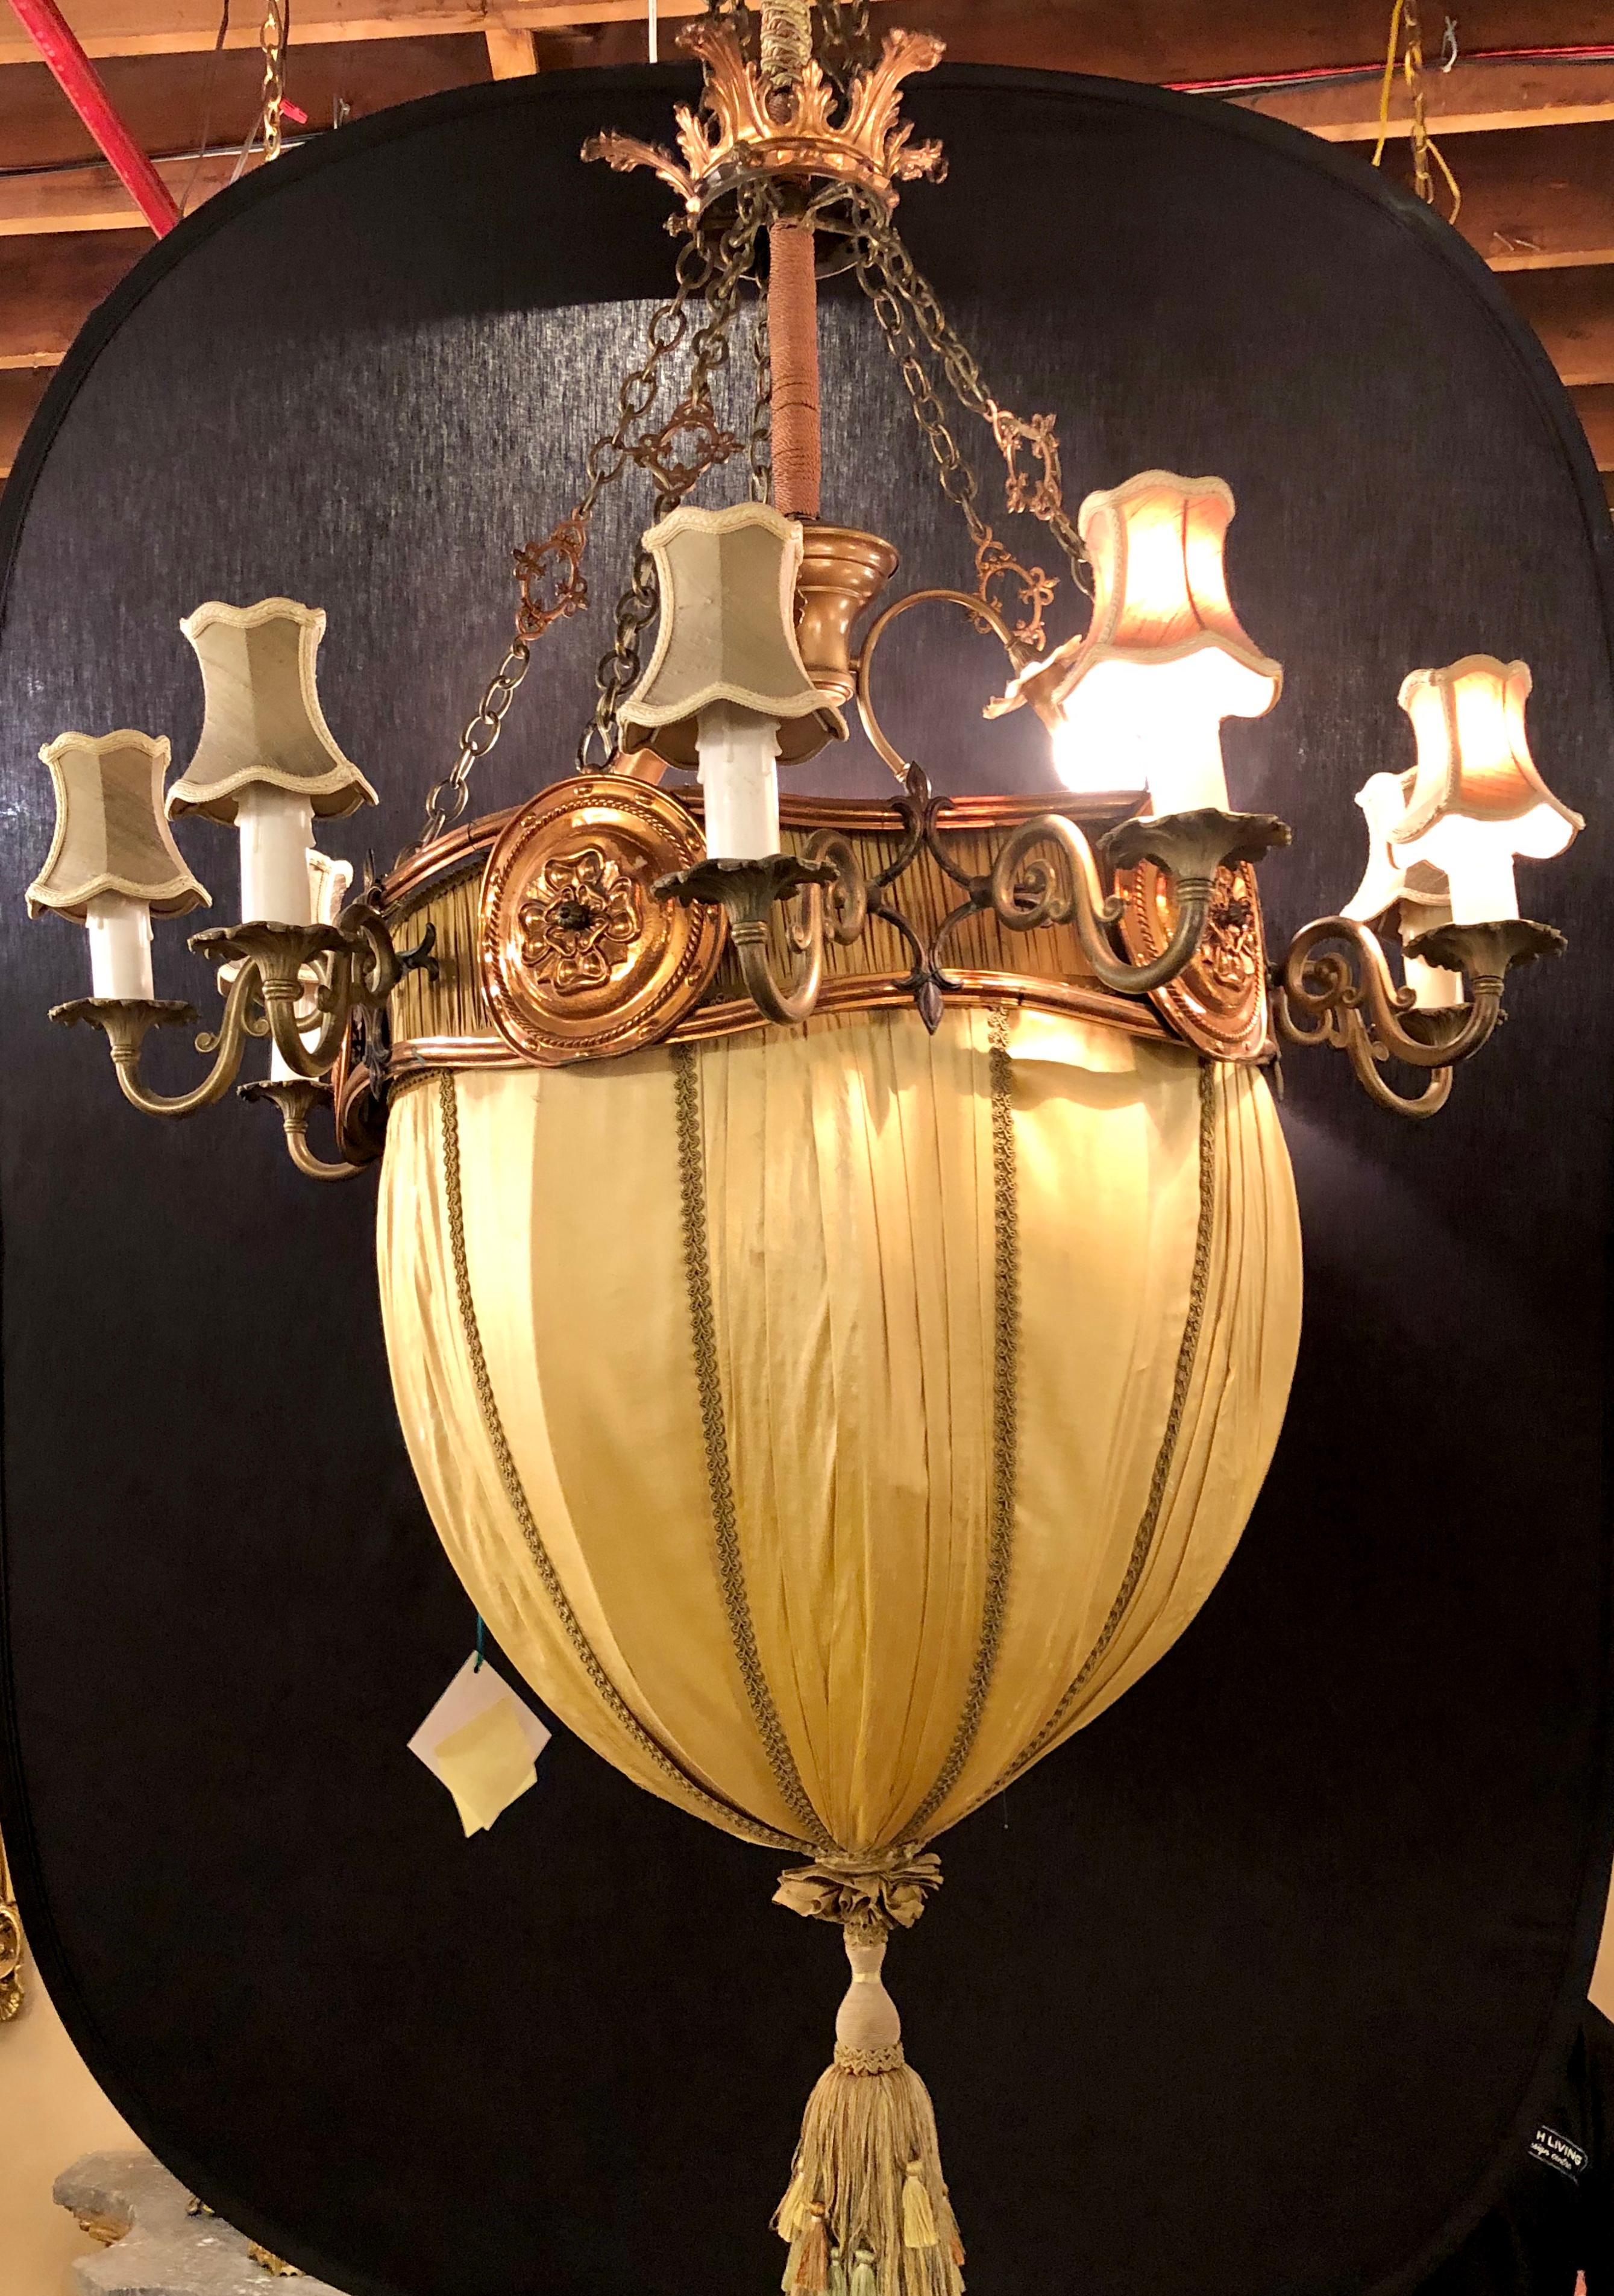 7 Foot High Hollywood Regency Light Fixture in Copper, Brass and Iron with Silk Dome Shade. This fine designer large and impressive chandelier has a copper drapery form frame with a domed lighted drapery material center cover terminating in a